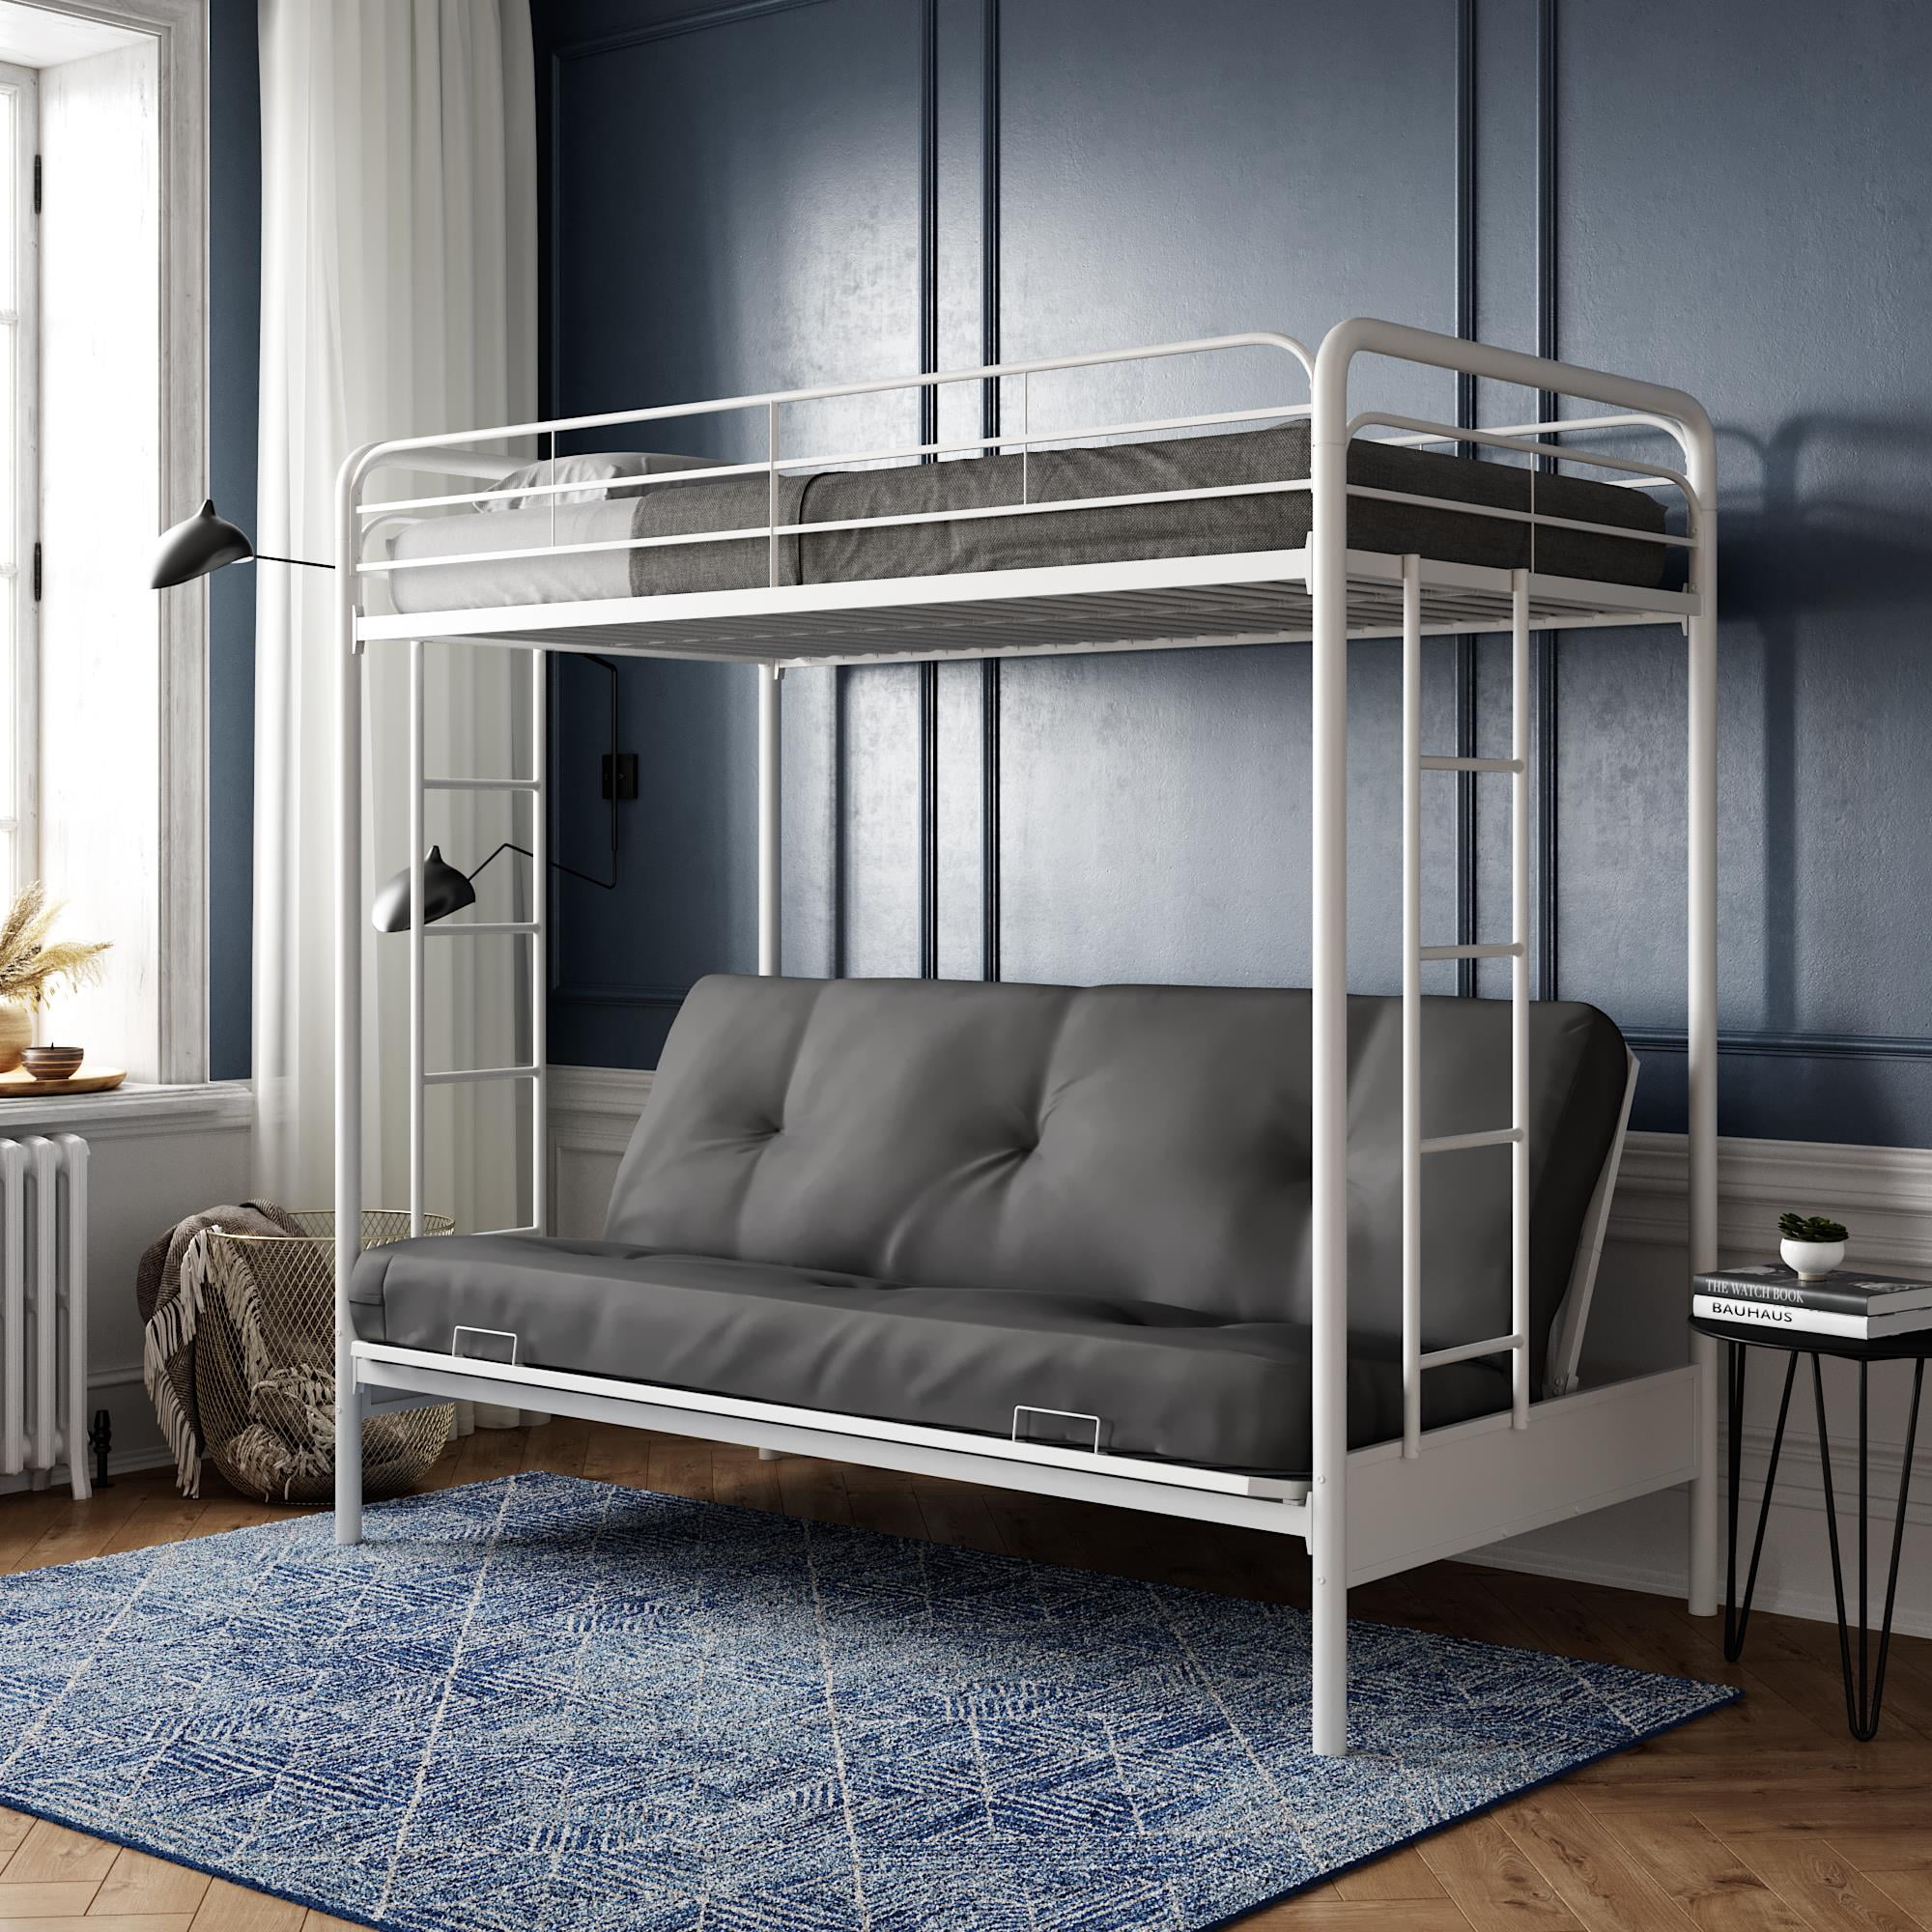 Dhp Twin Over Futon Metal Bunk Bed, Twin Over Futon Bunk Bed Ikea